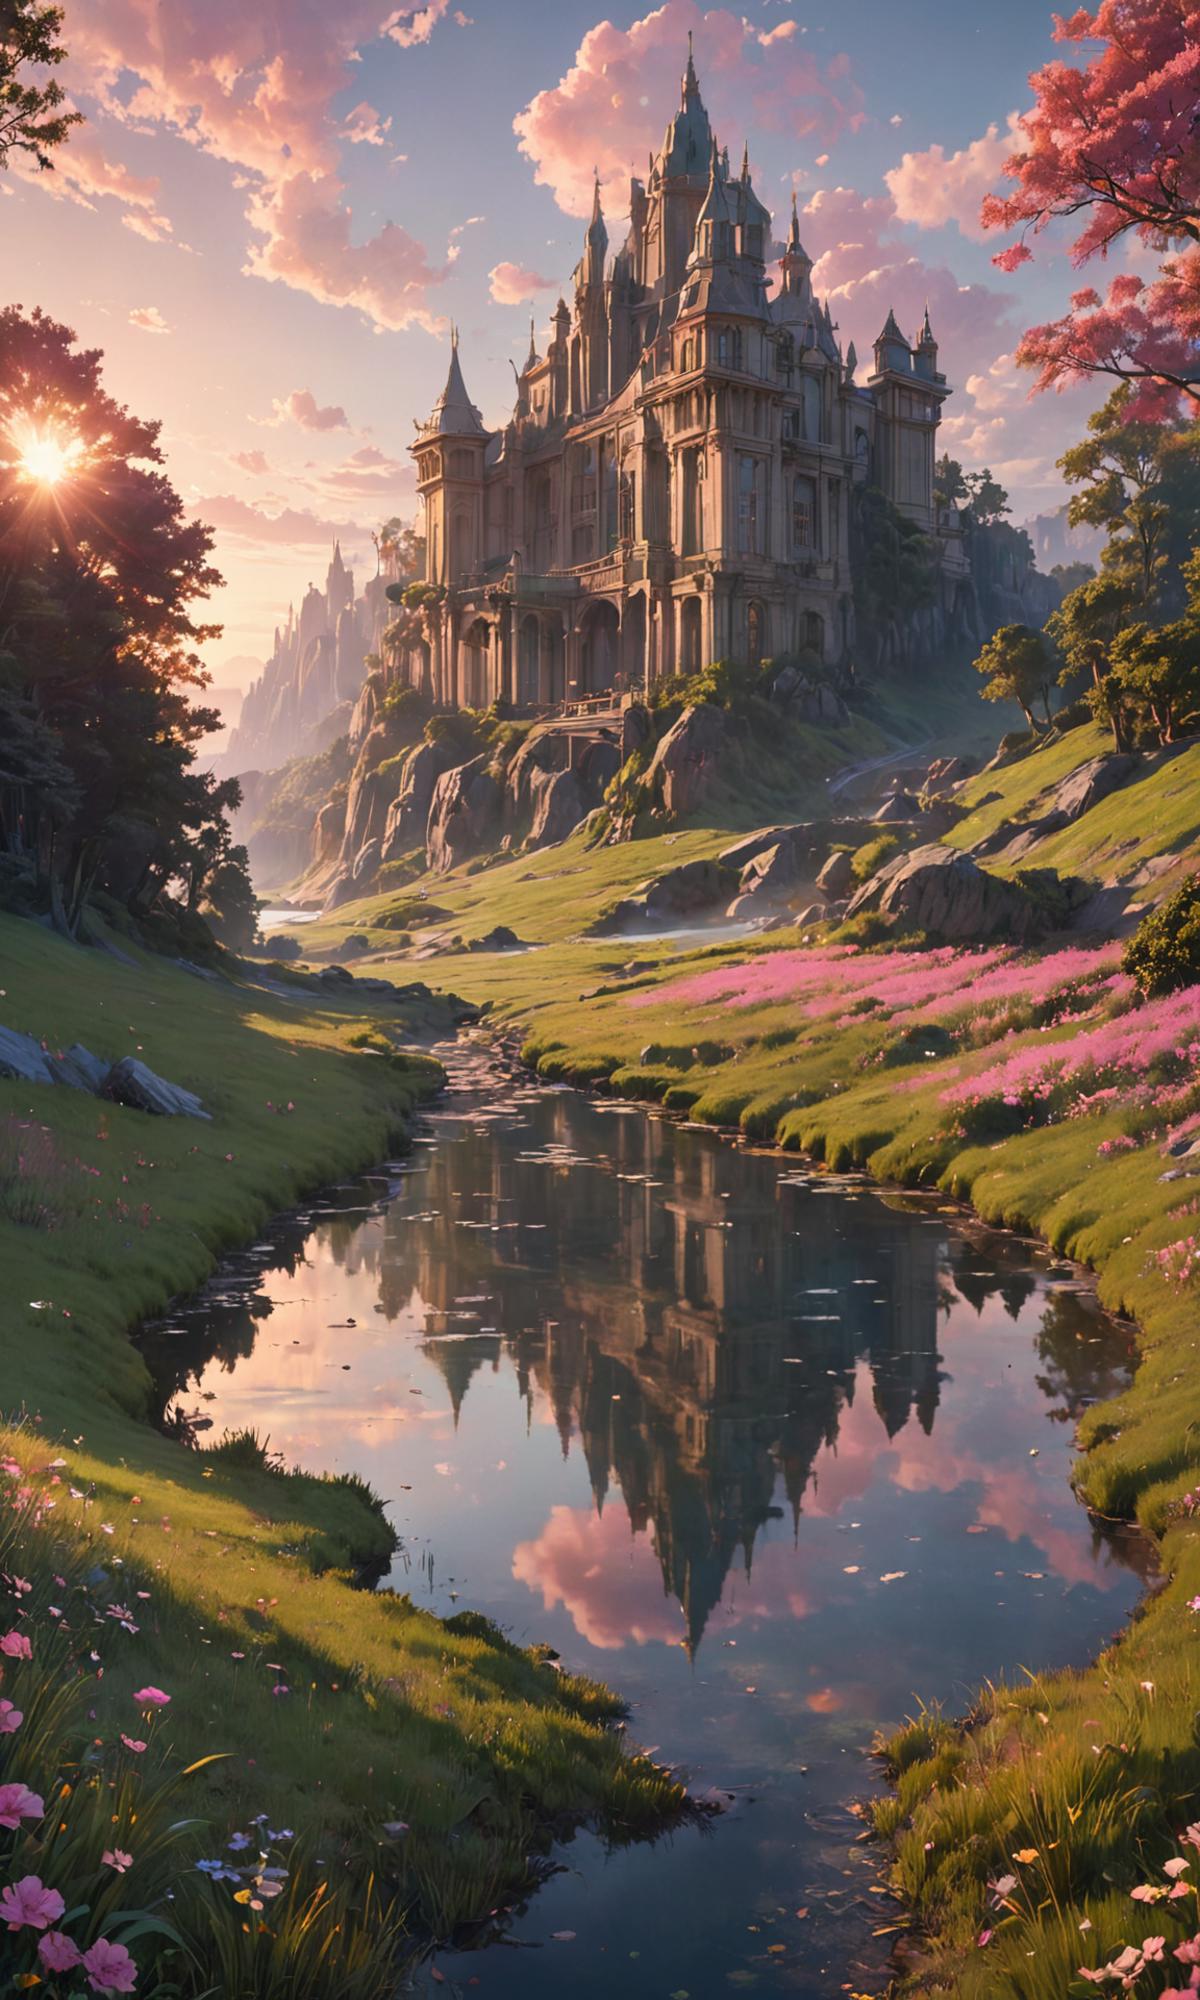 A Fantasy Painting of a Castle near a River with Pink Flowers